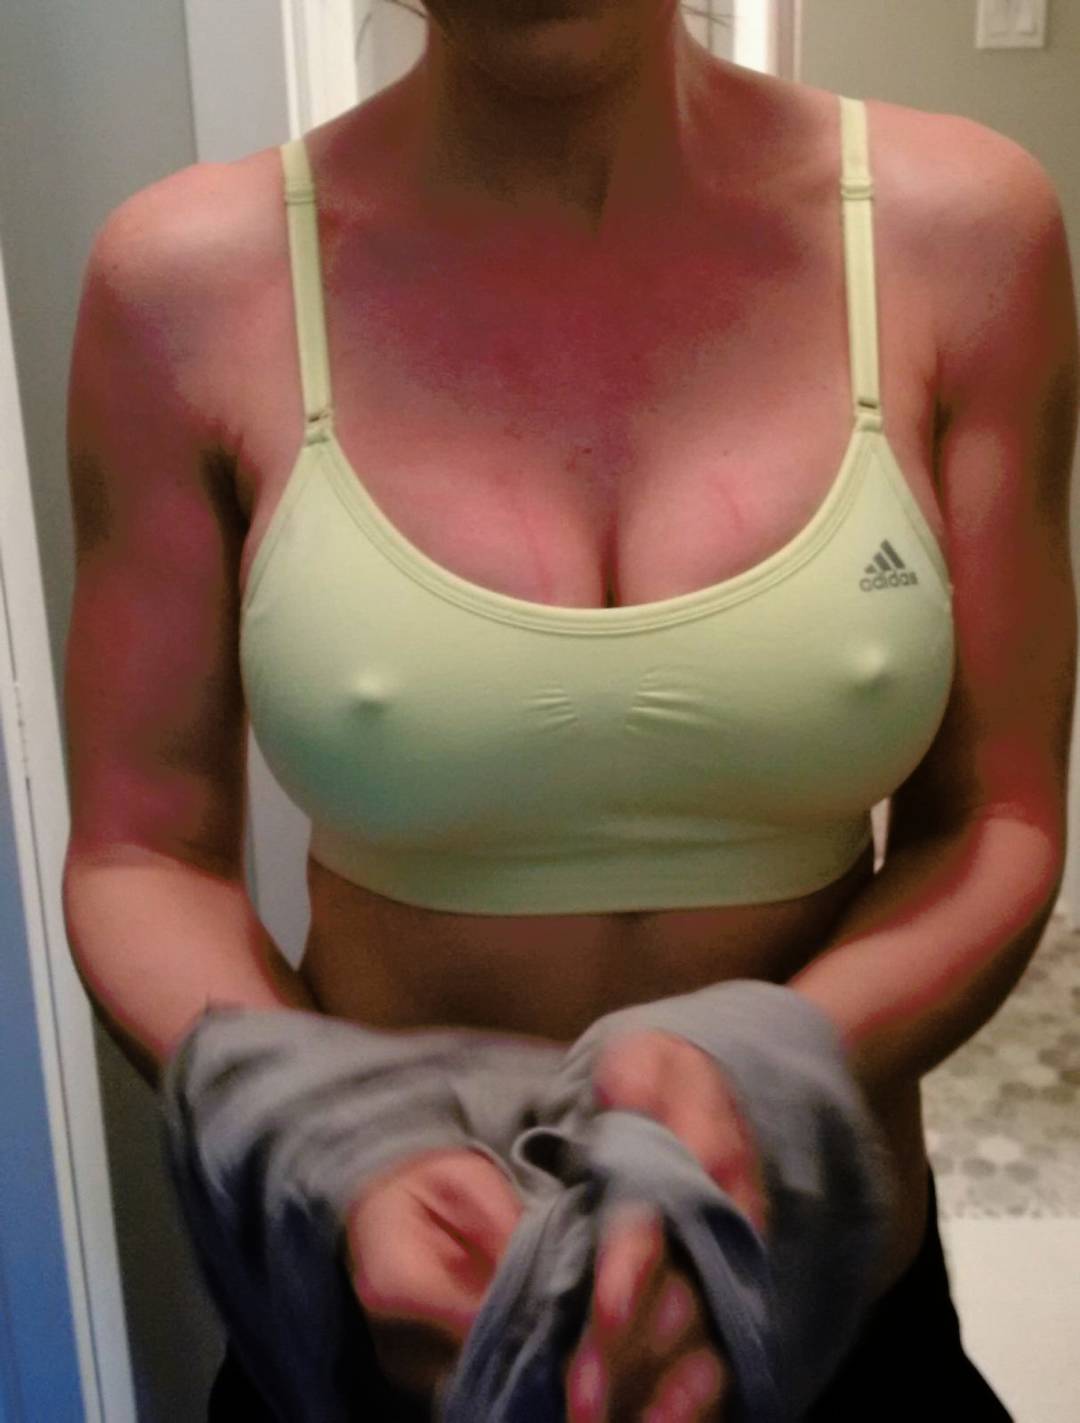 my wife's sports bra can't hide her nips and I'm sure all the guys